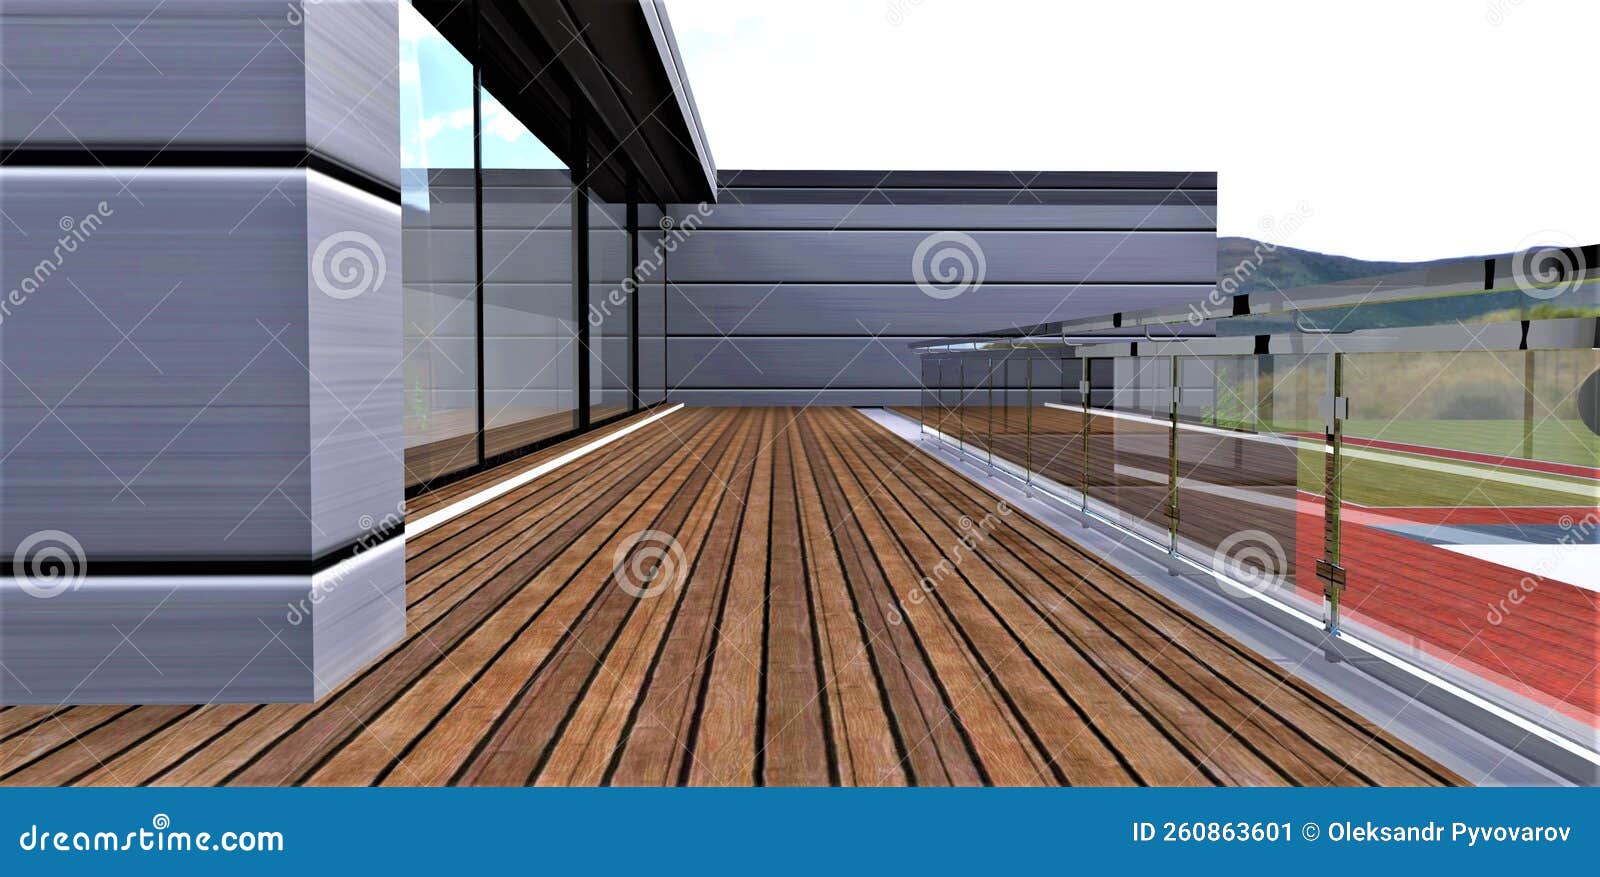 feet-friendly ecologicaly clean terrace board as a flooring of the stunning balcony of the contemporary private cottage. 3d